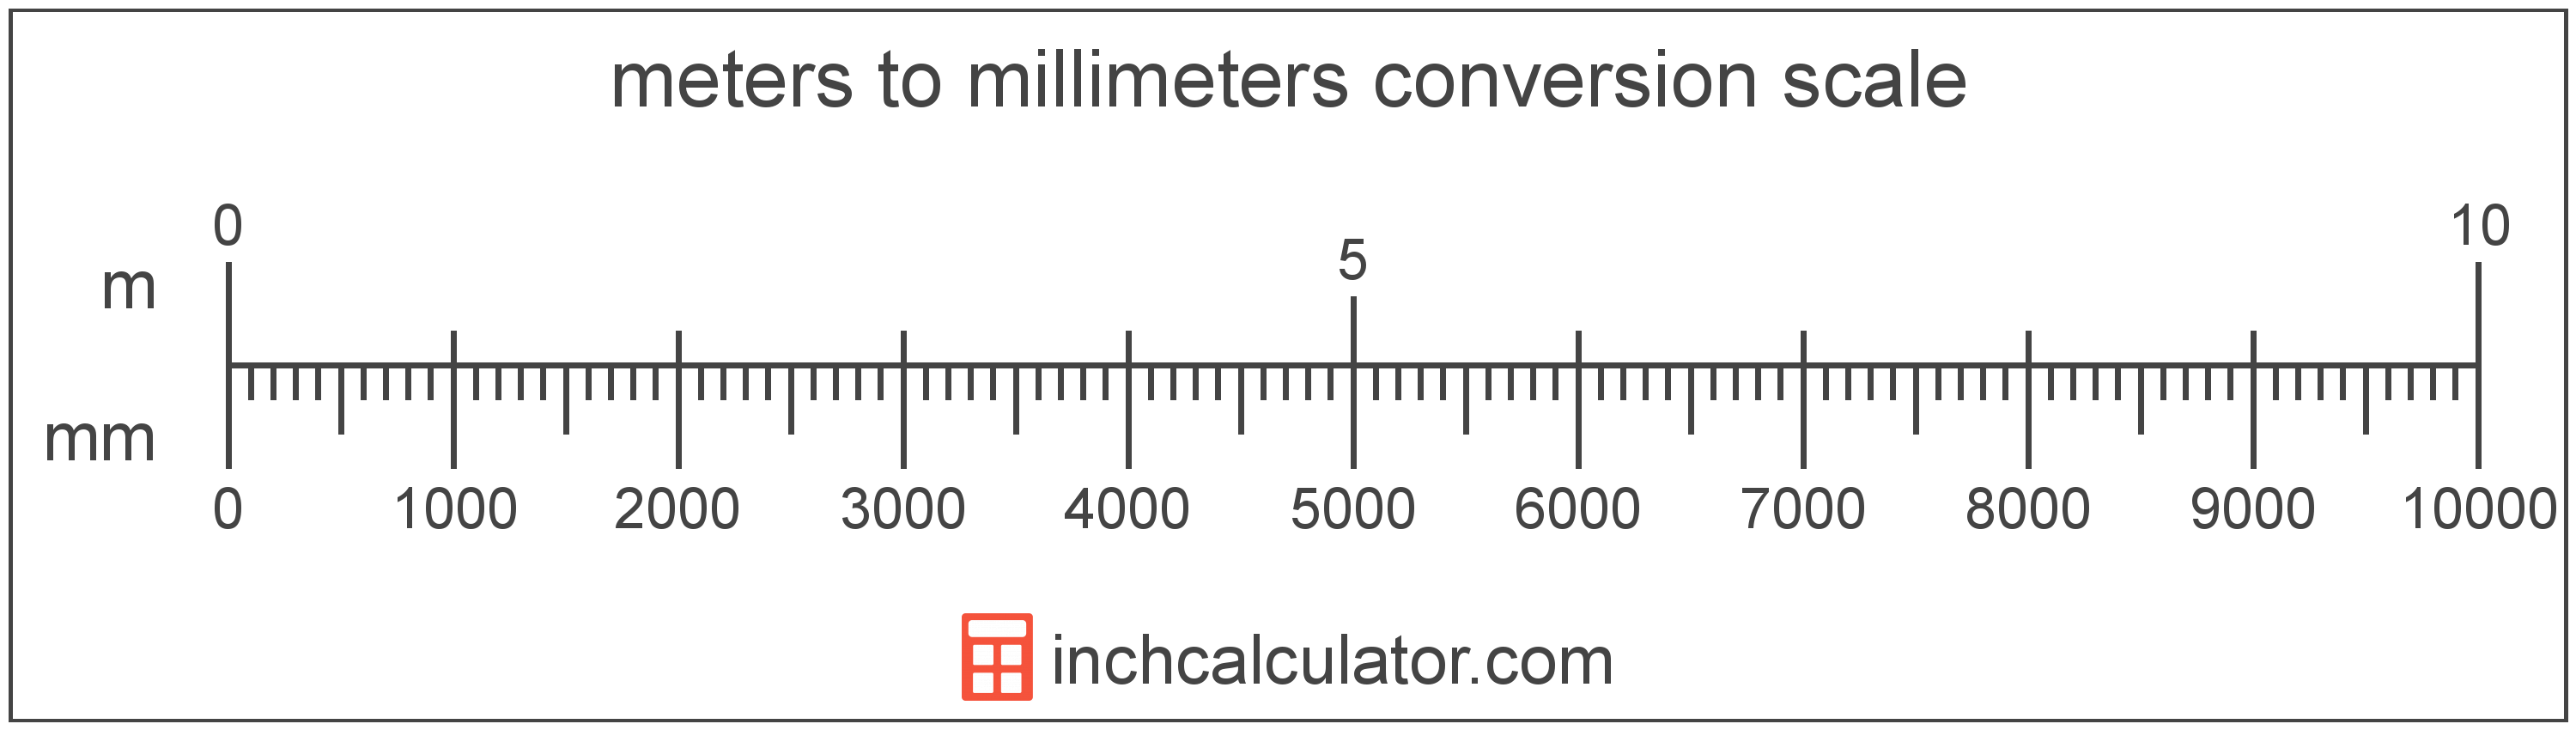 meters-to-millimeters-conversion-m-to-mm-inch-calculator